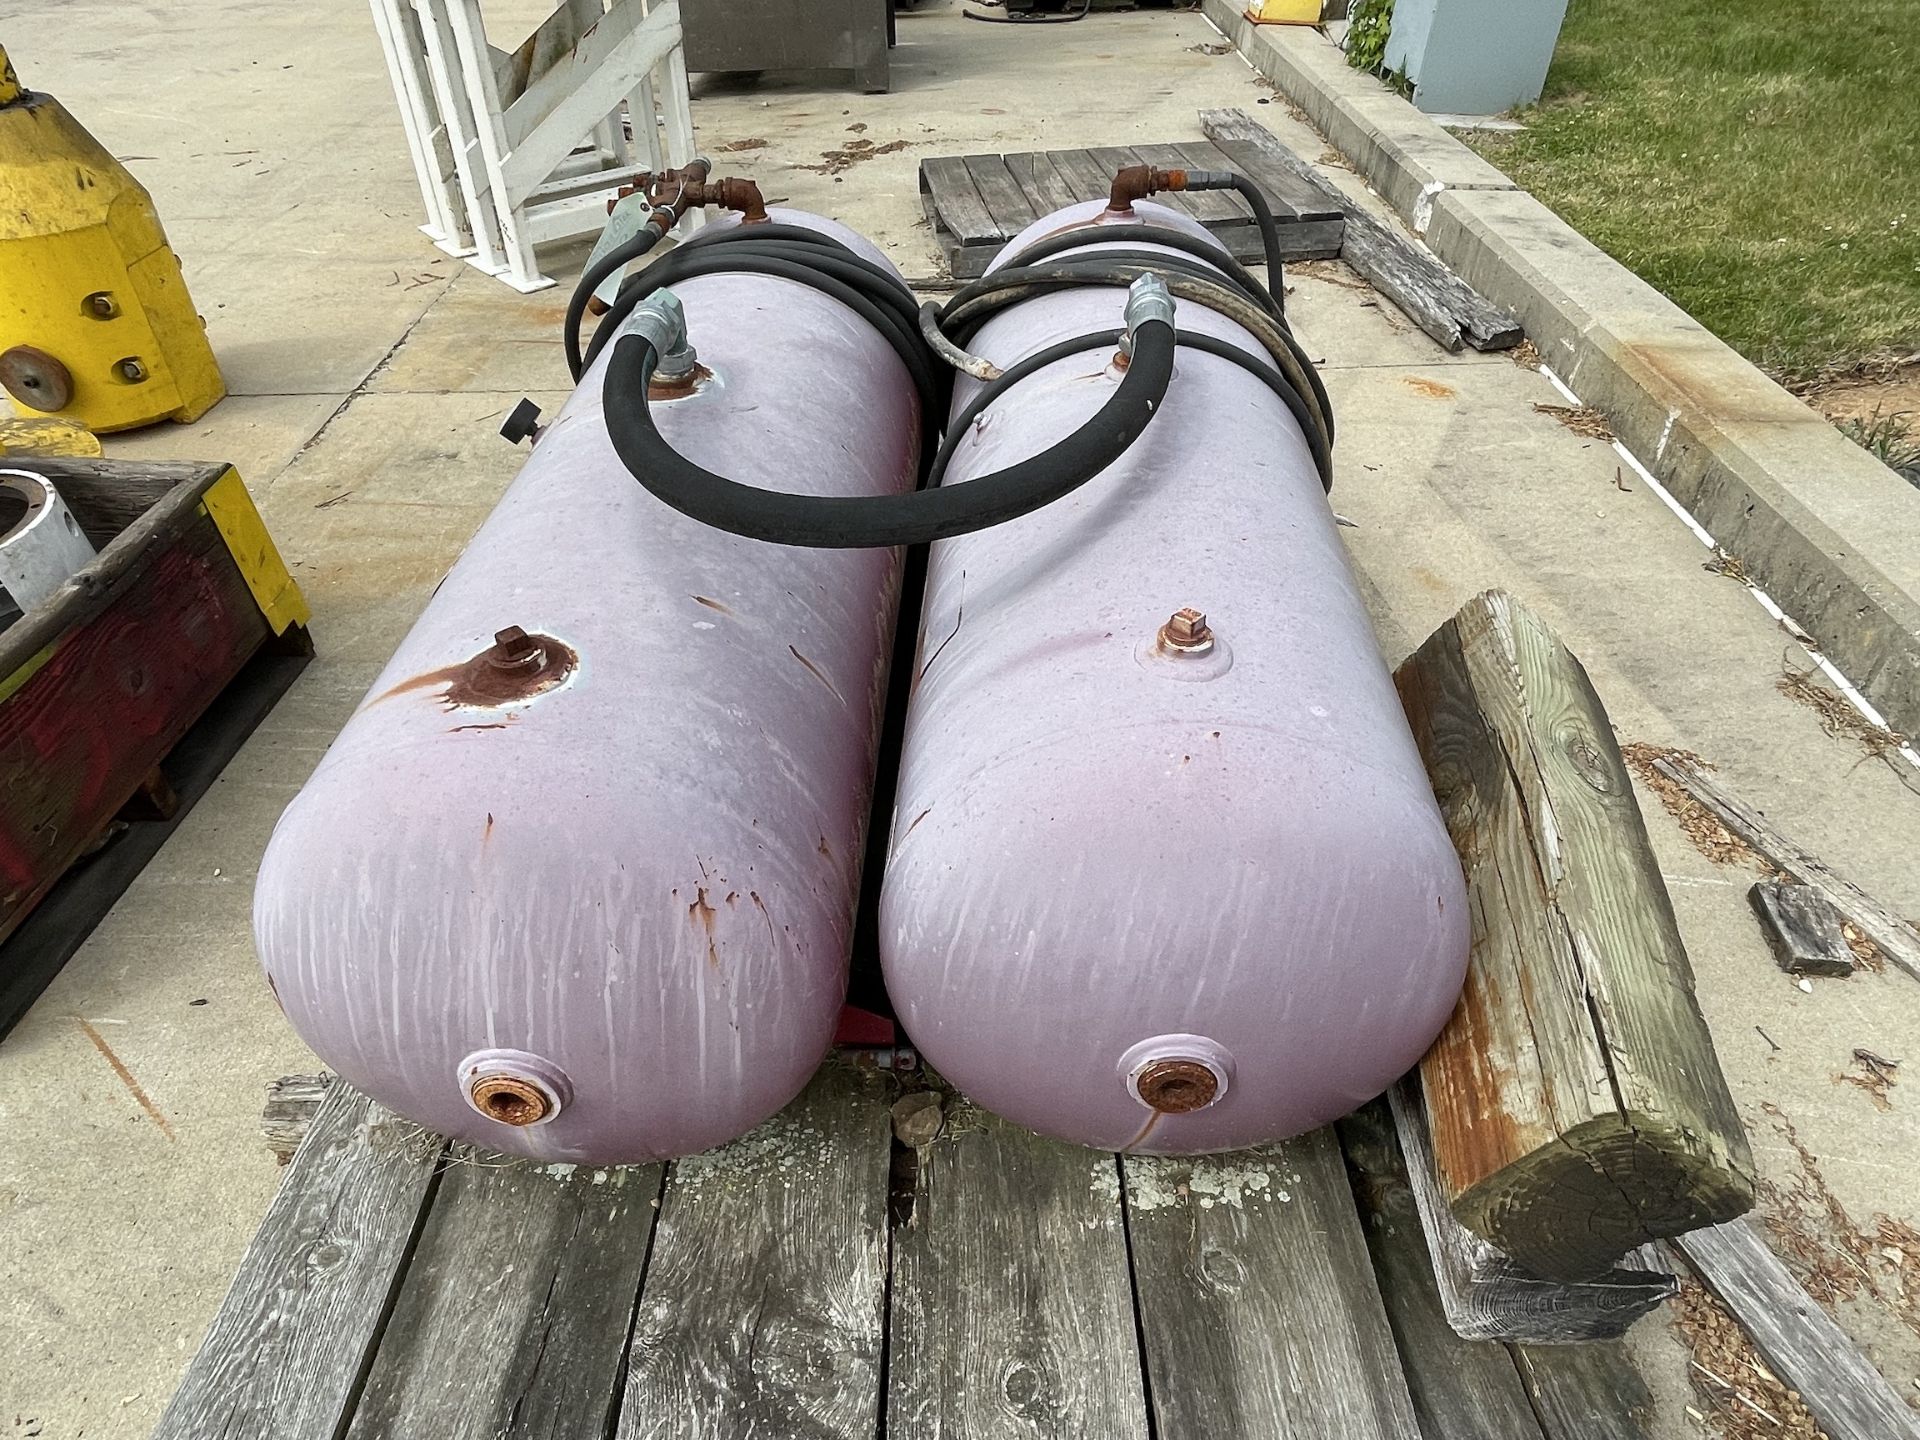 Lot of 2 Air Tanks (S21) - West Chester - Image 6 of 7